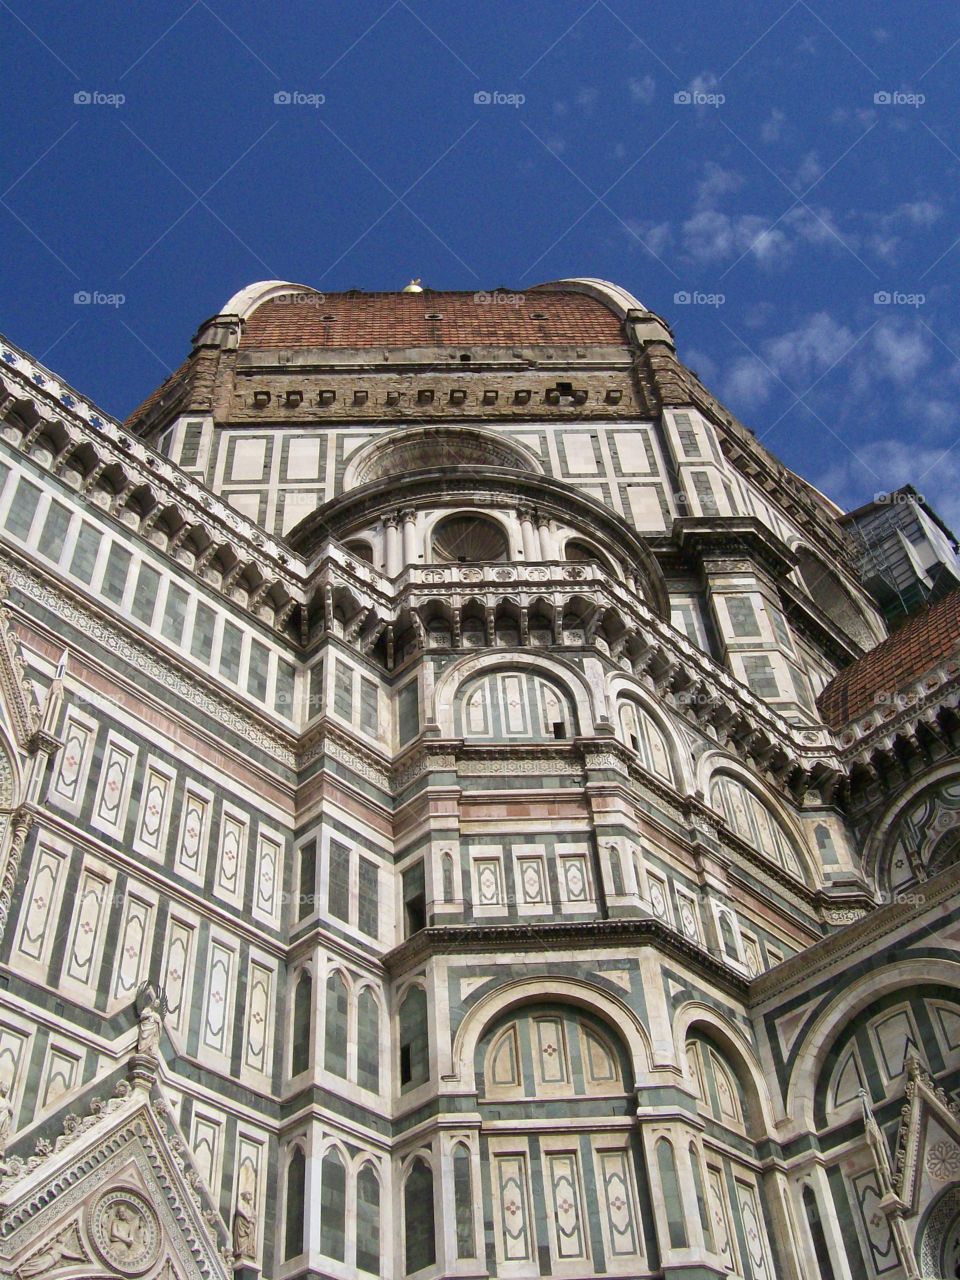 Looking up at the Cattedrale di Santa Maria del Fiore.  The main church of Florence, Italy. 